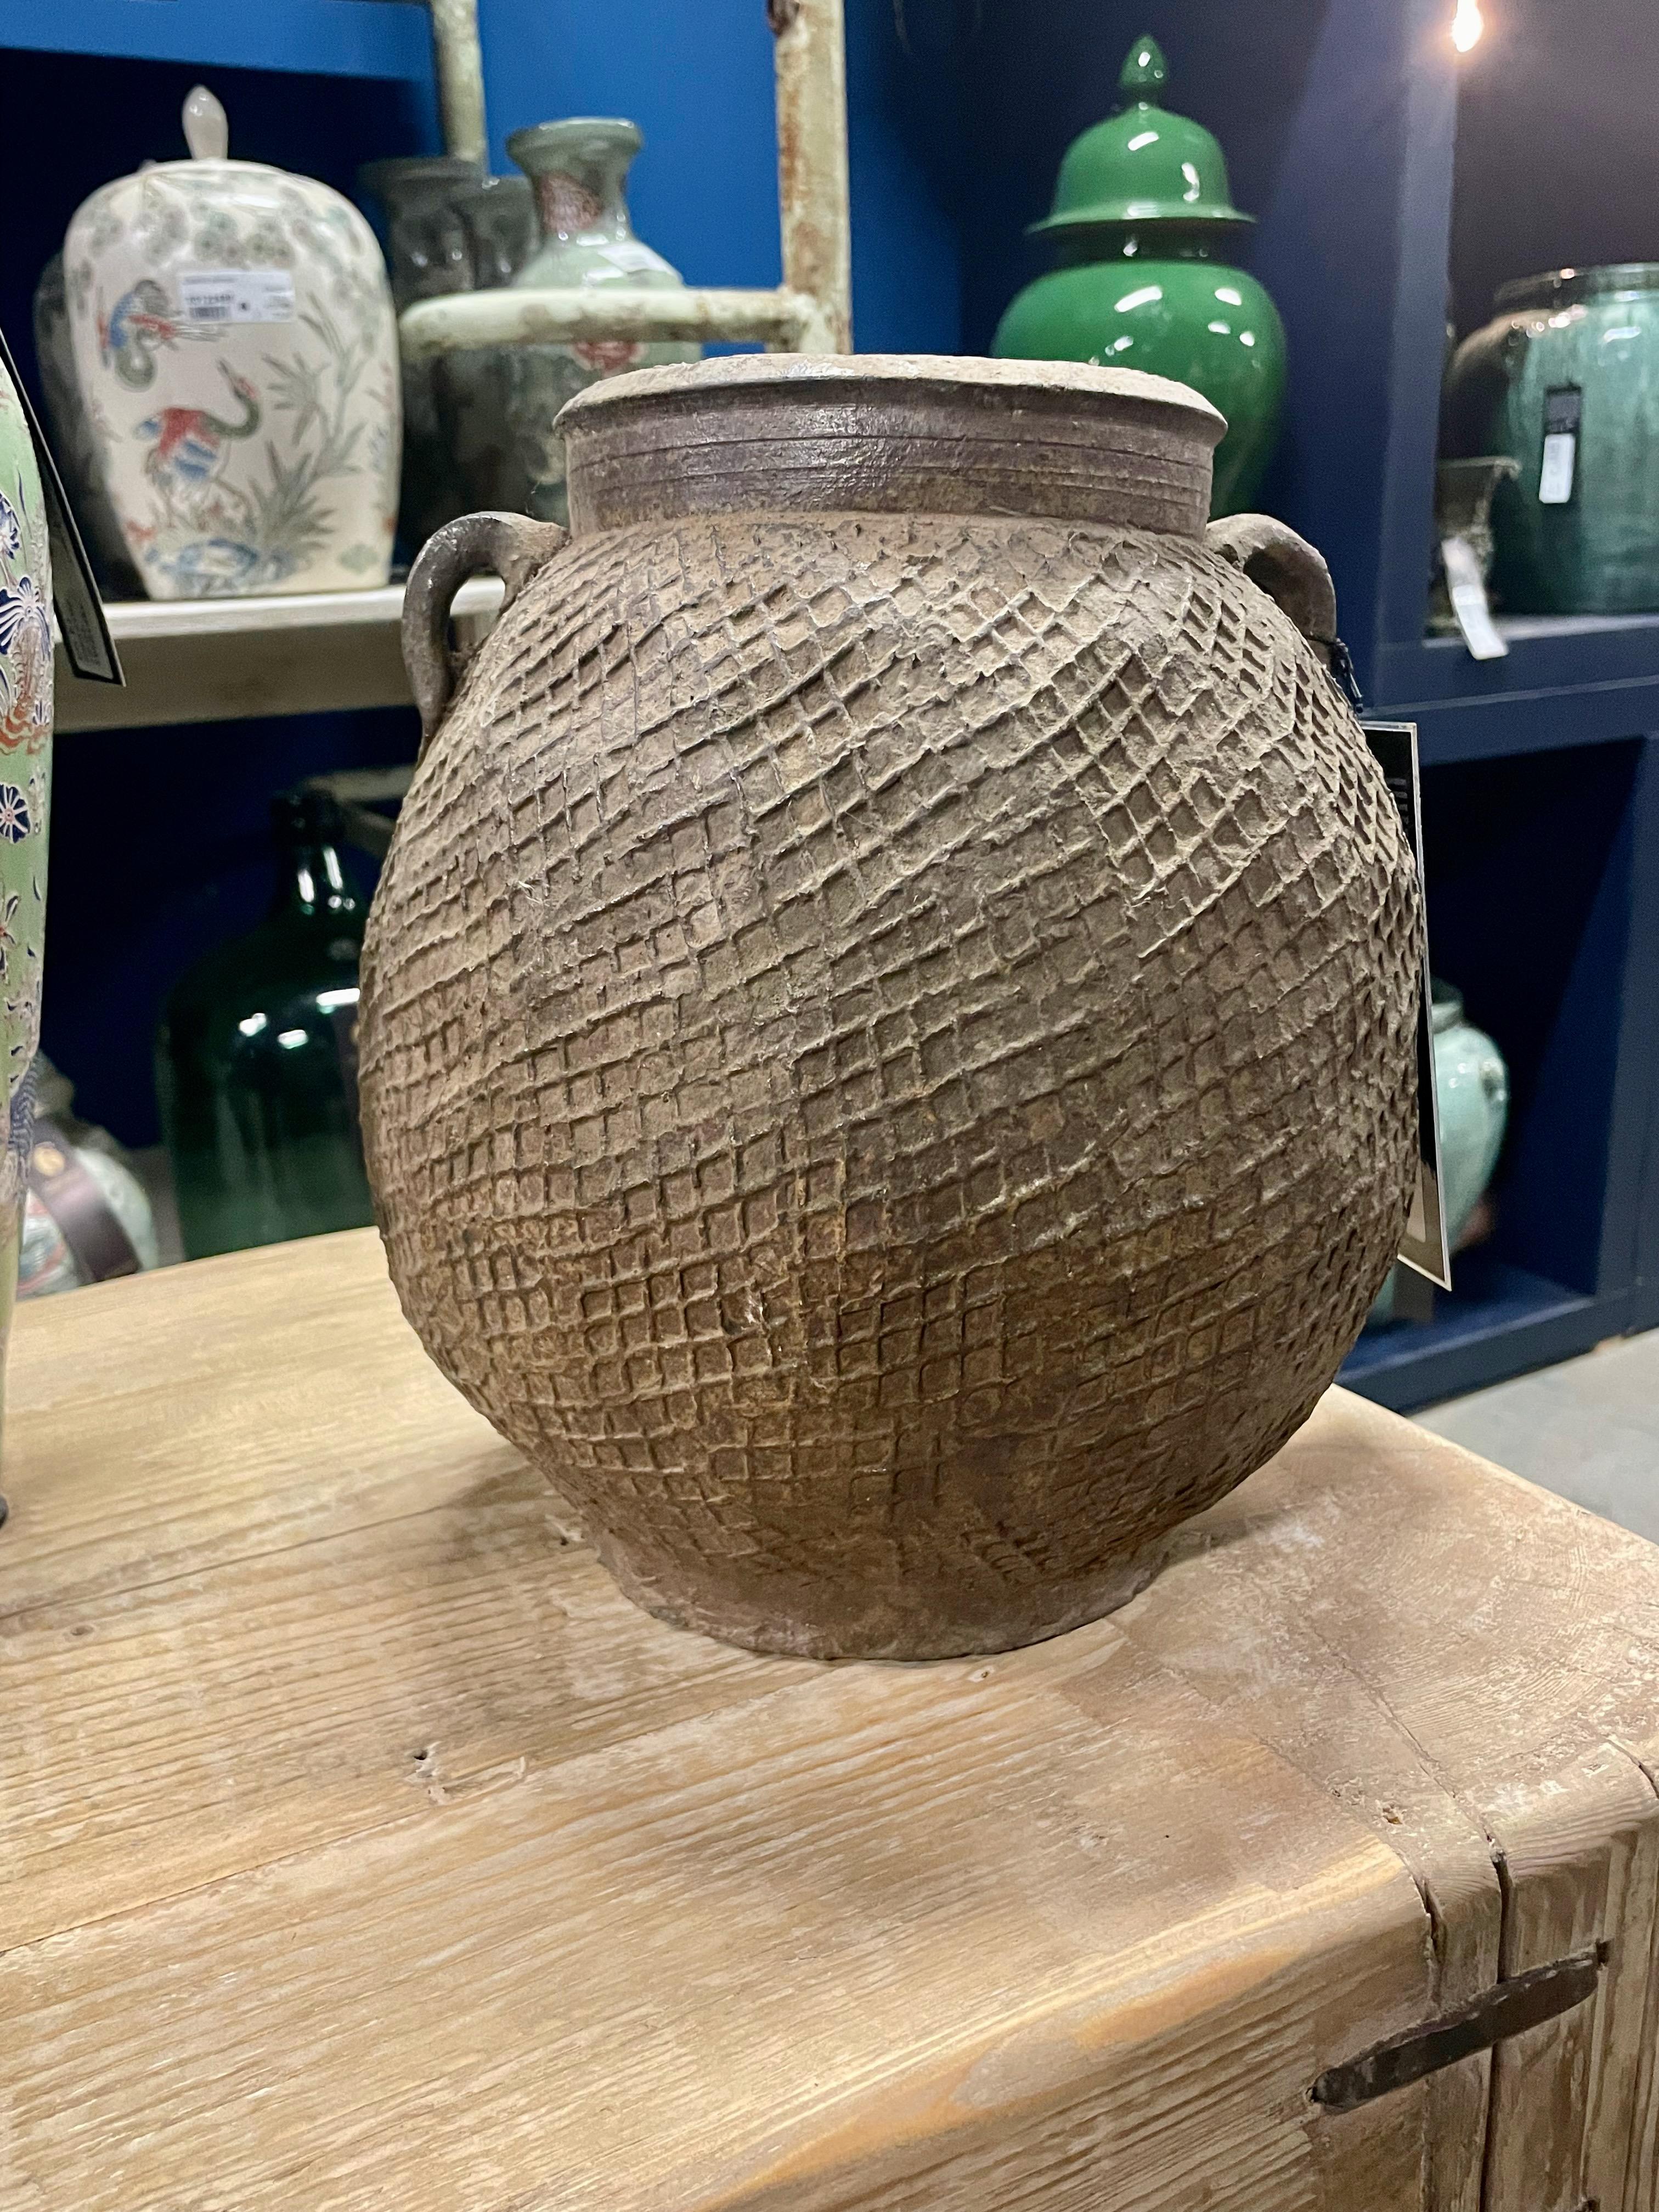 1940's Chinese stoneware vase with raised criss cross texture.
Two small handles.
Originally used to store grains.
Two available and sold individually.
ARRIVING APRIL